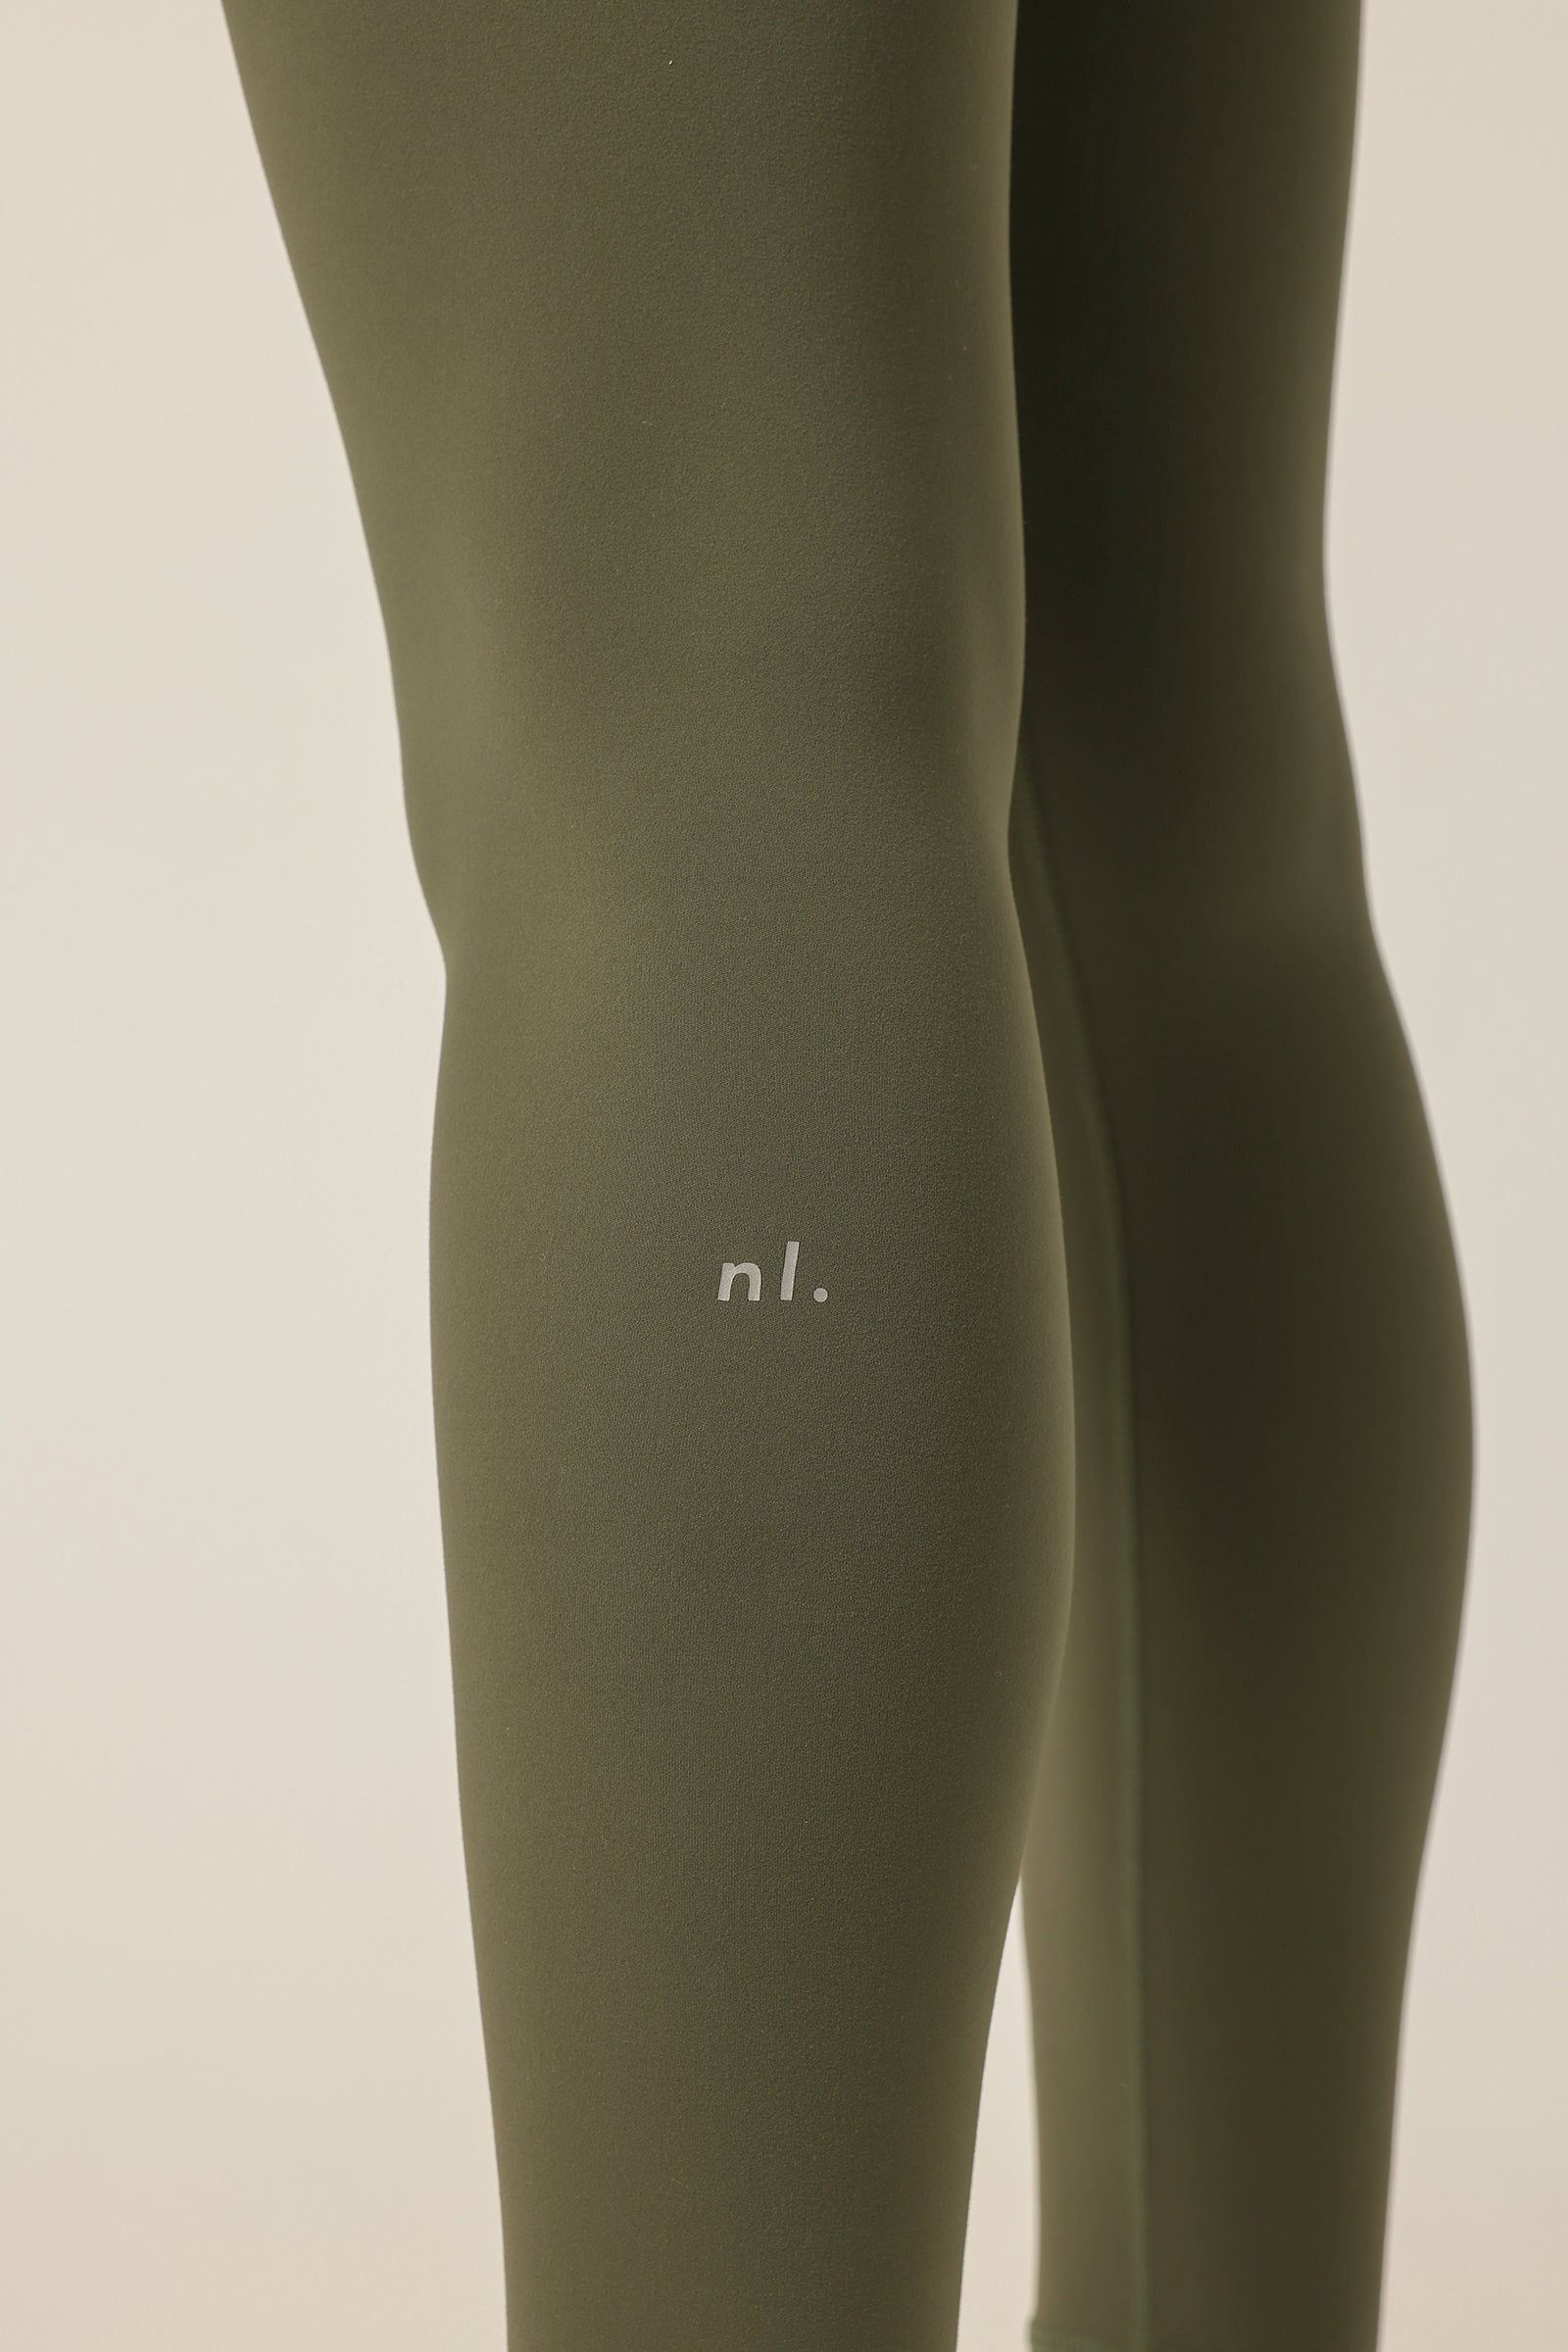 Nude Lucy Nude Active Full Length Tights in Forest